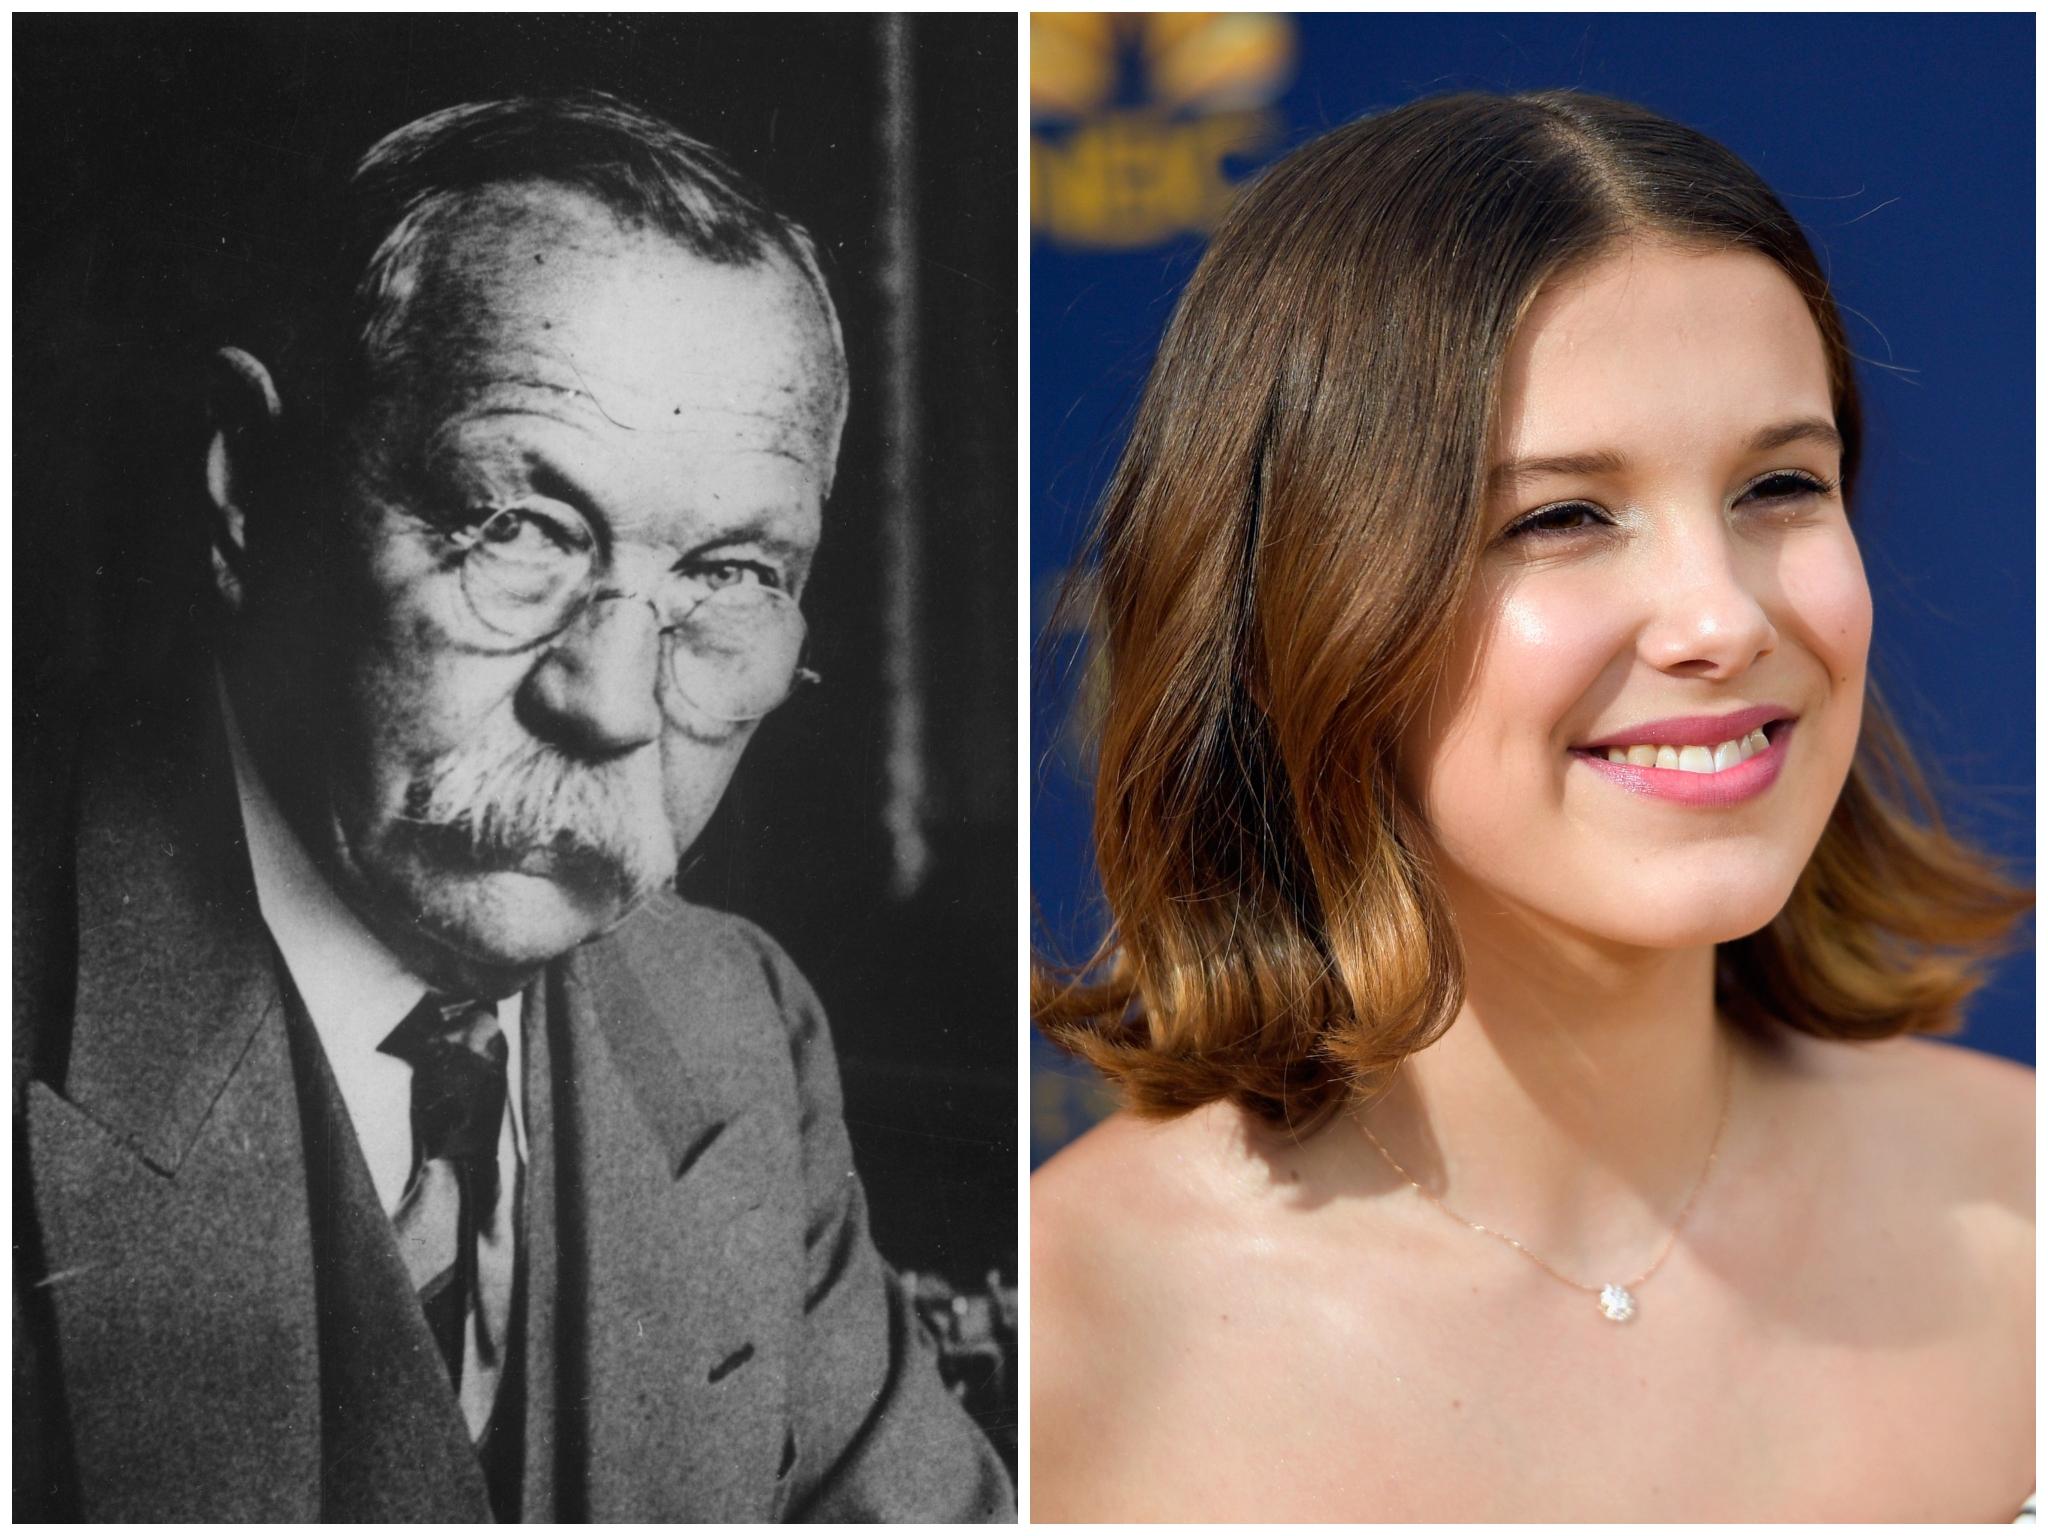 Millie Bobby Brown plays Sherlock Holmes' younger sister in new film 'Enola Holmes'